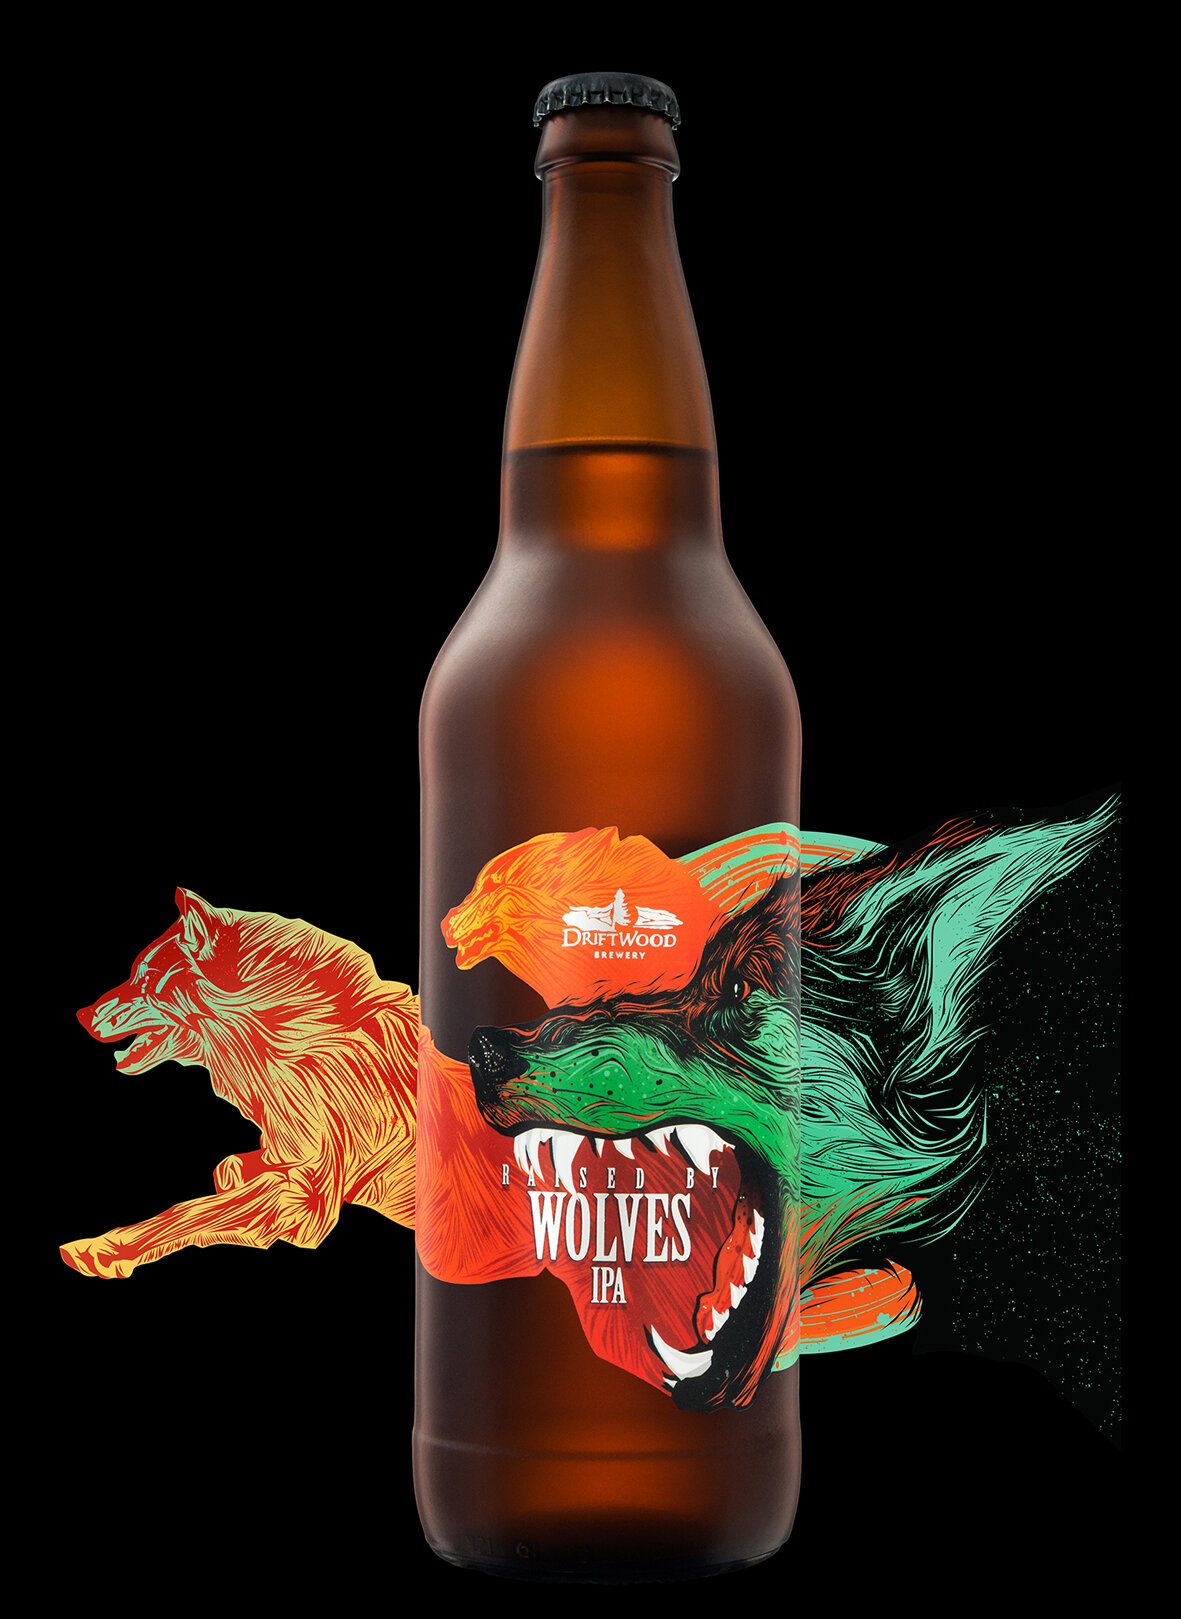 Raised By Wolves Wild IPA